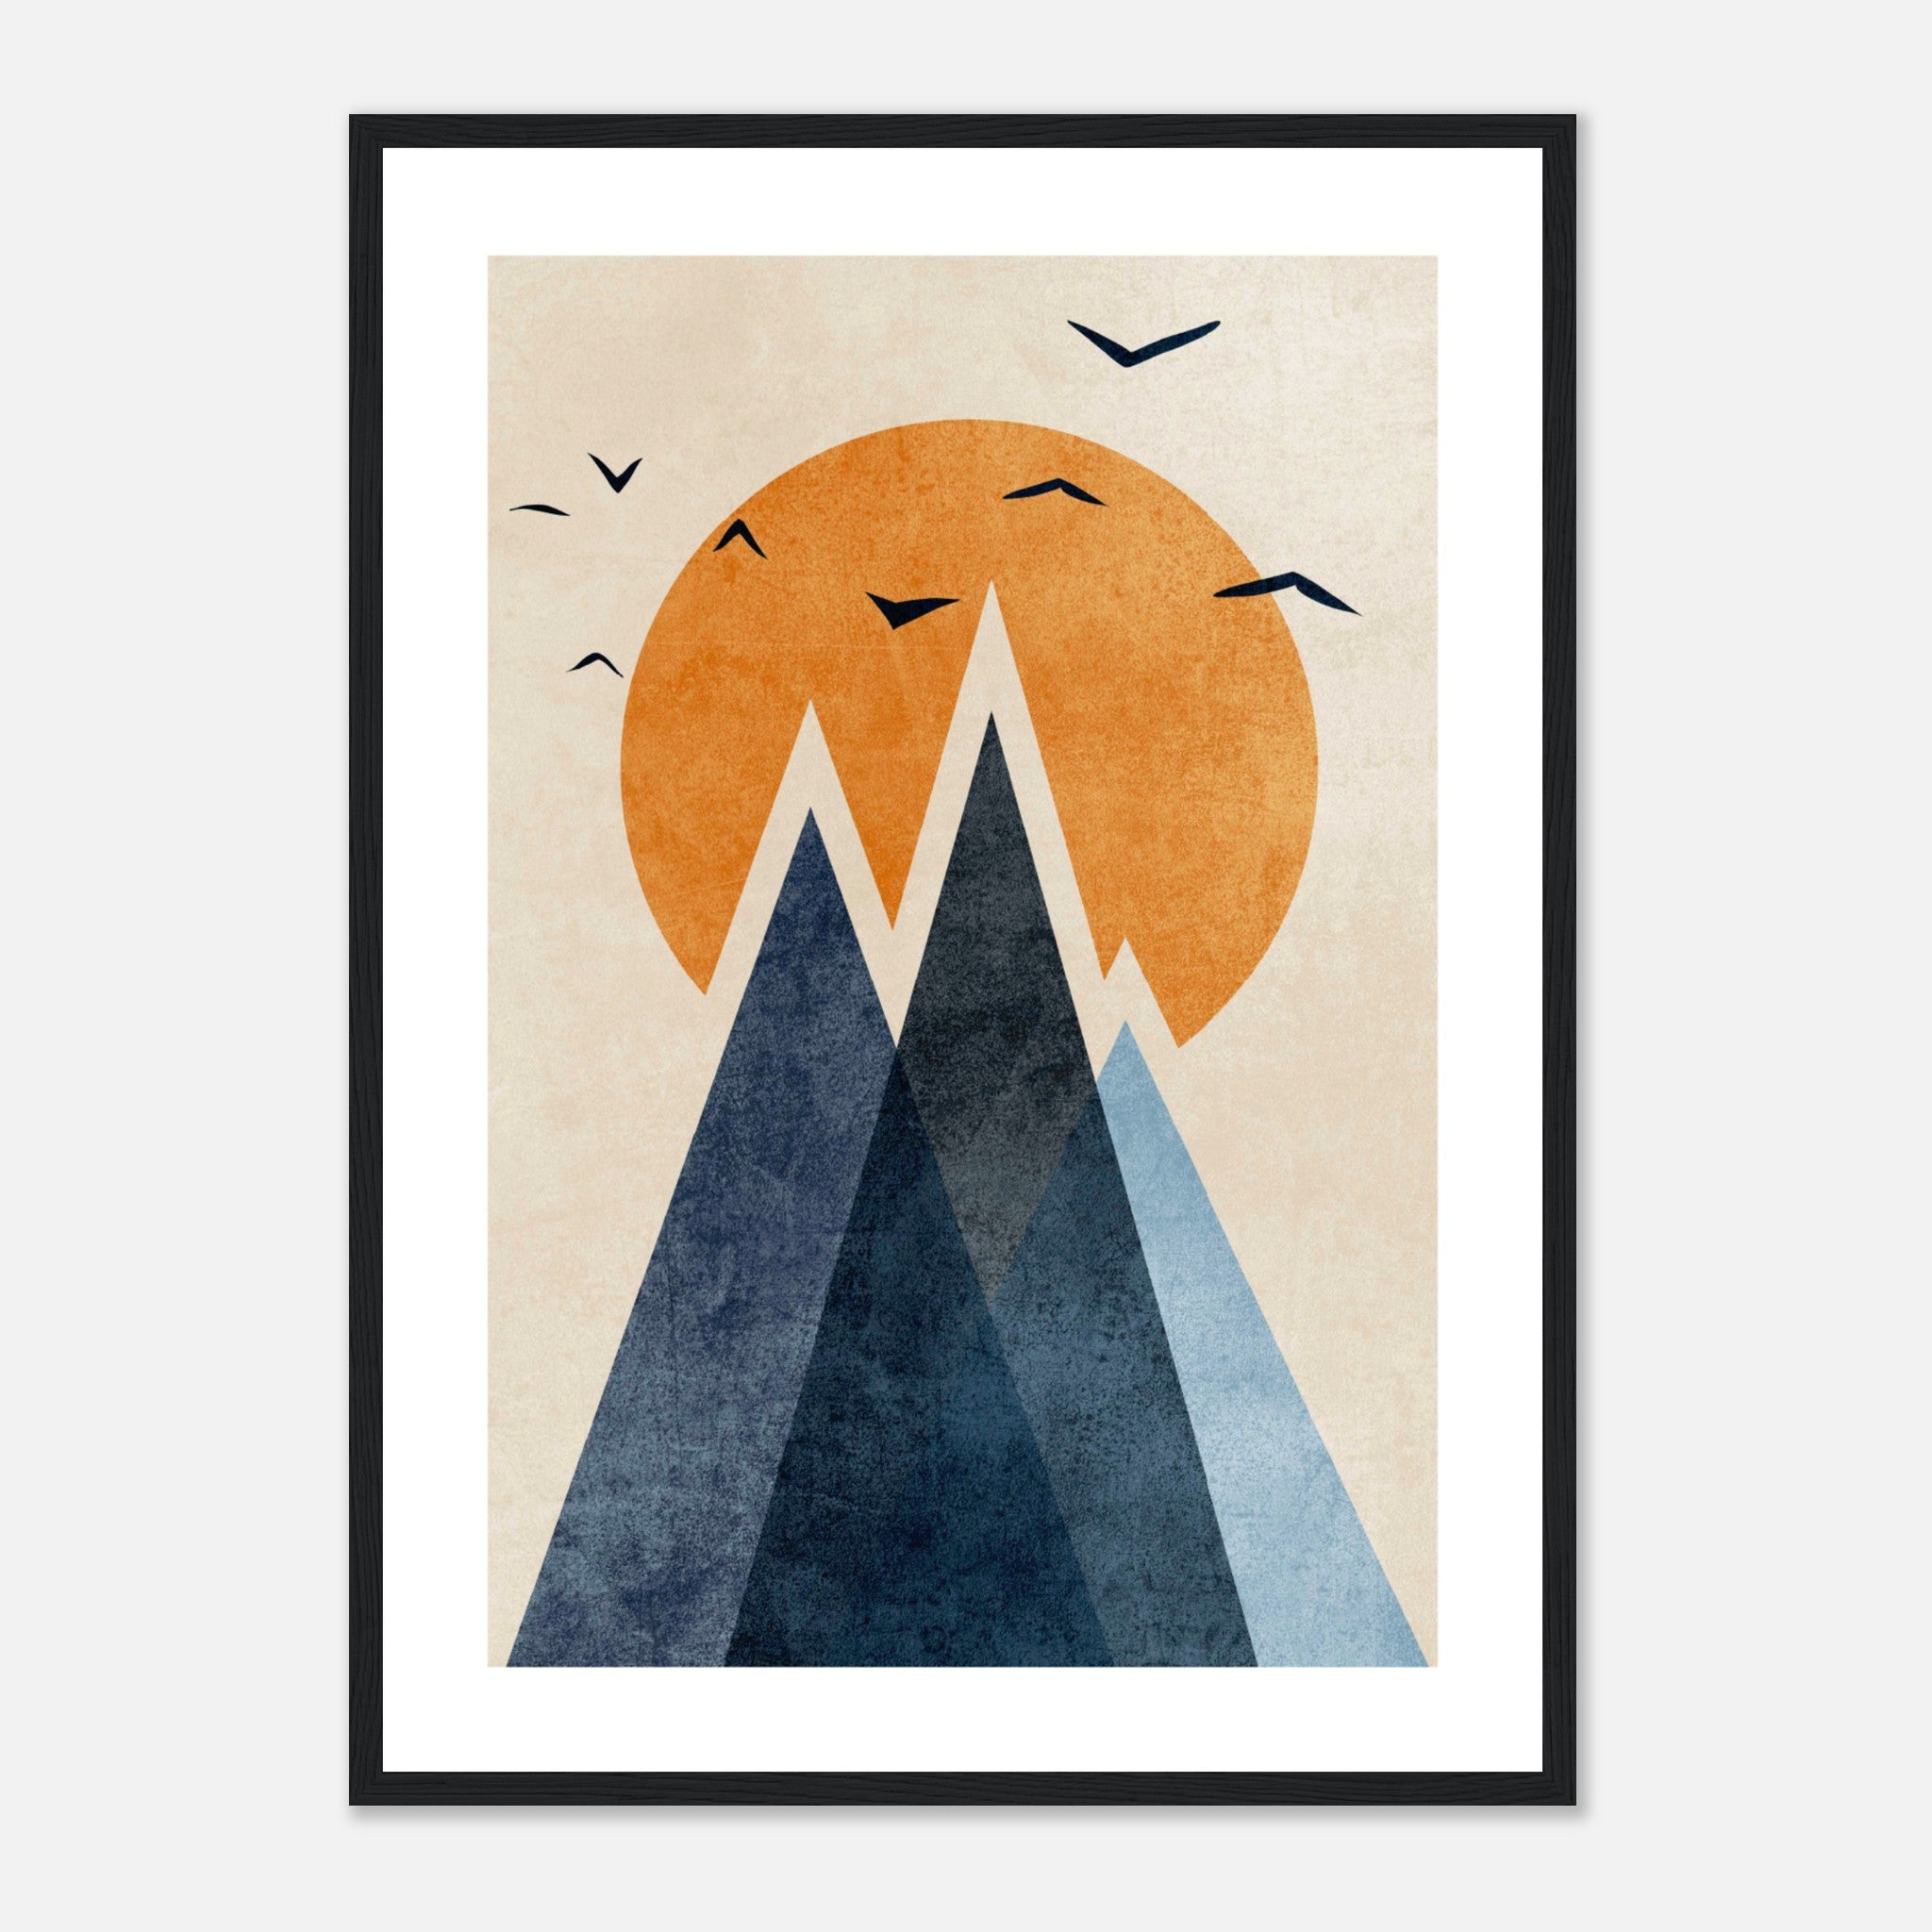 The Mountains - Expressionism Art 1 Poster